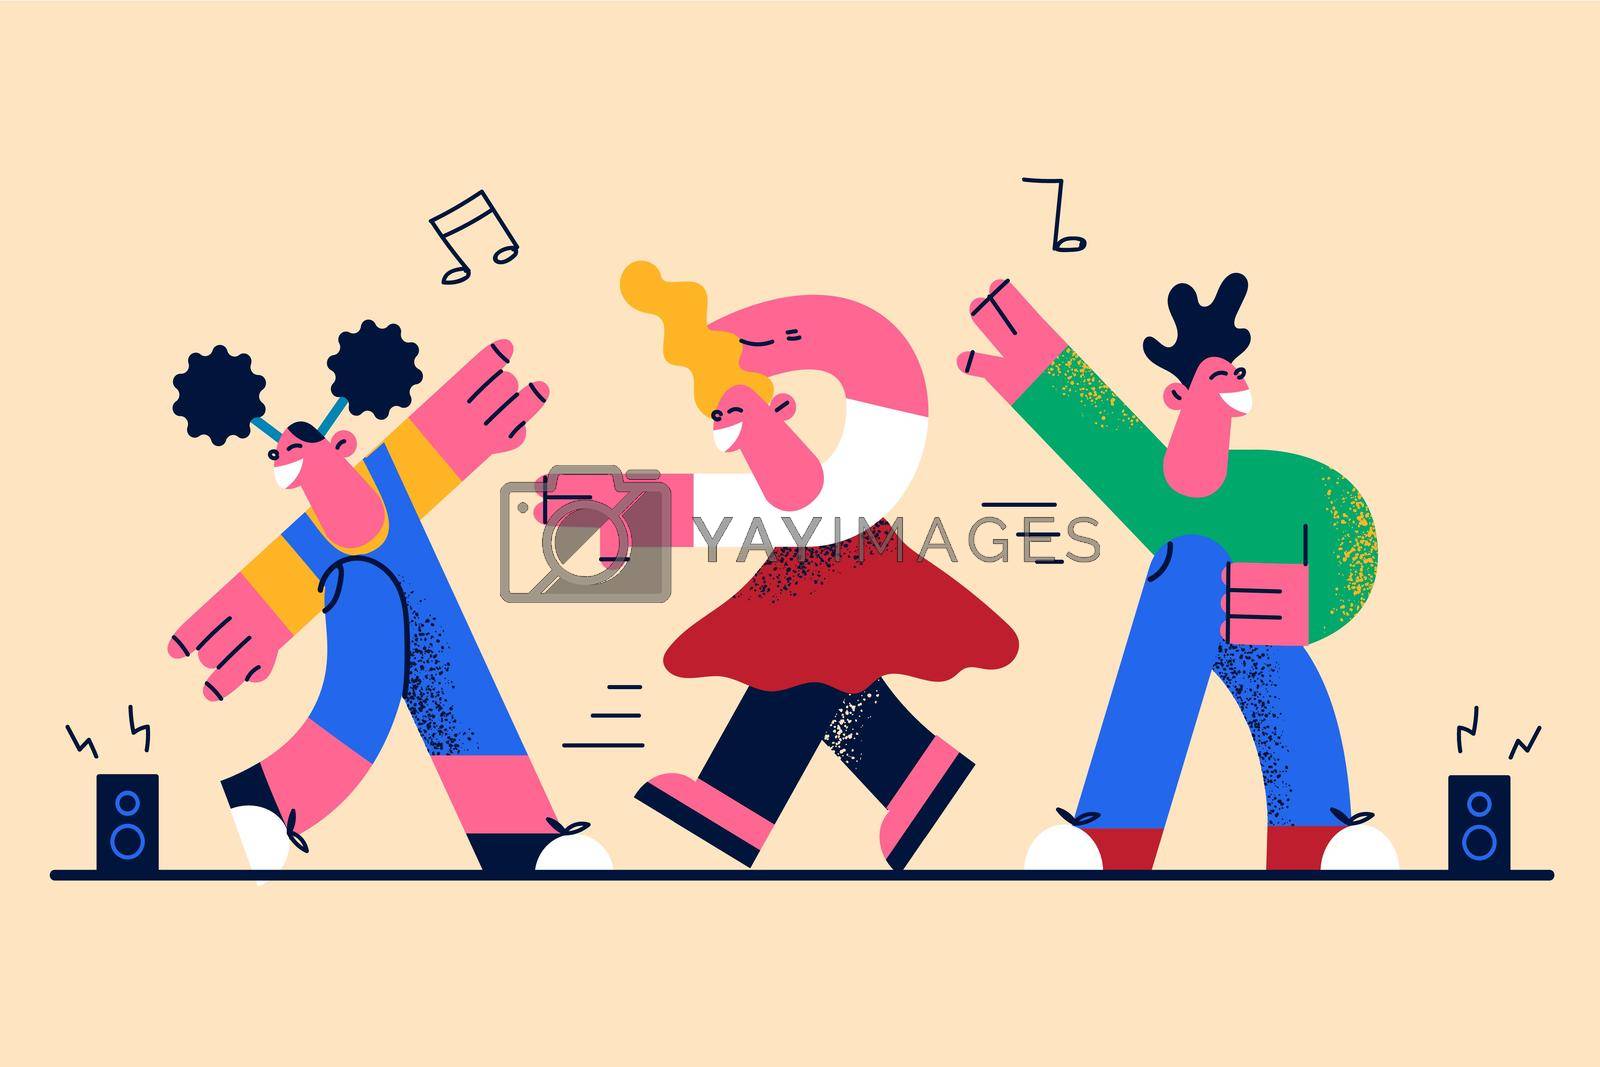 Teenager happy lifestyle outdoors concept. Group of young smiling friends teens cartoon characters dancing listening to music feeling excited and happy having fun vector illustration